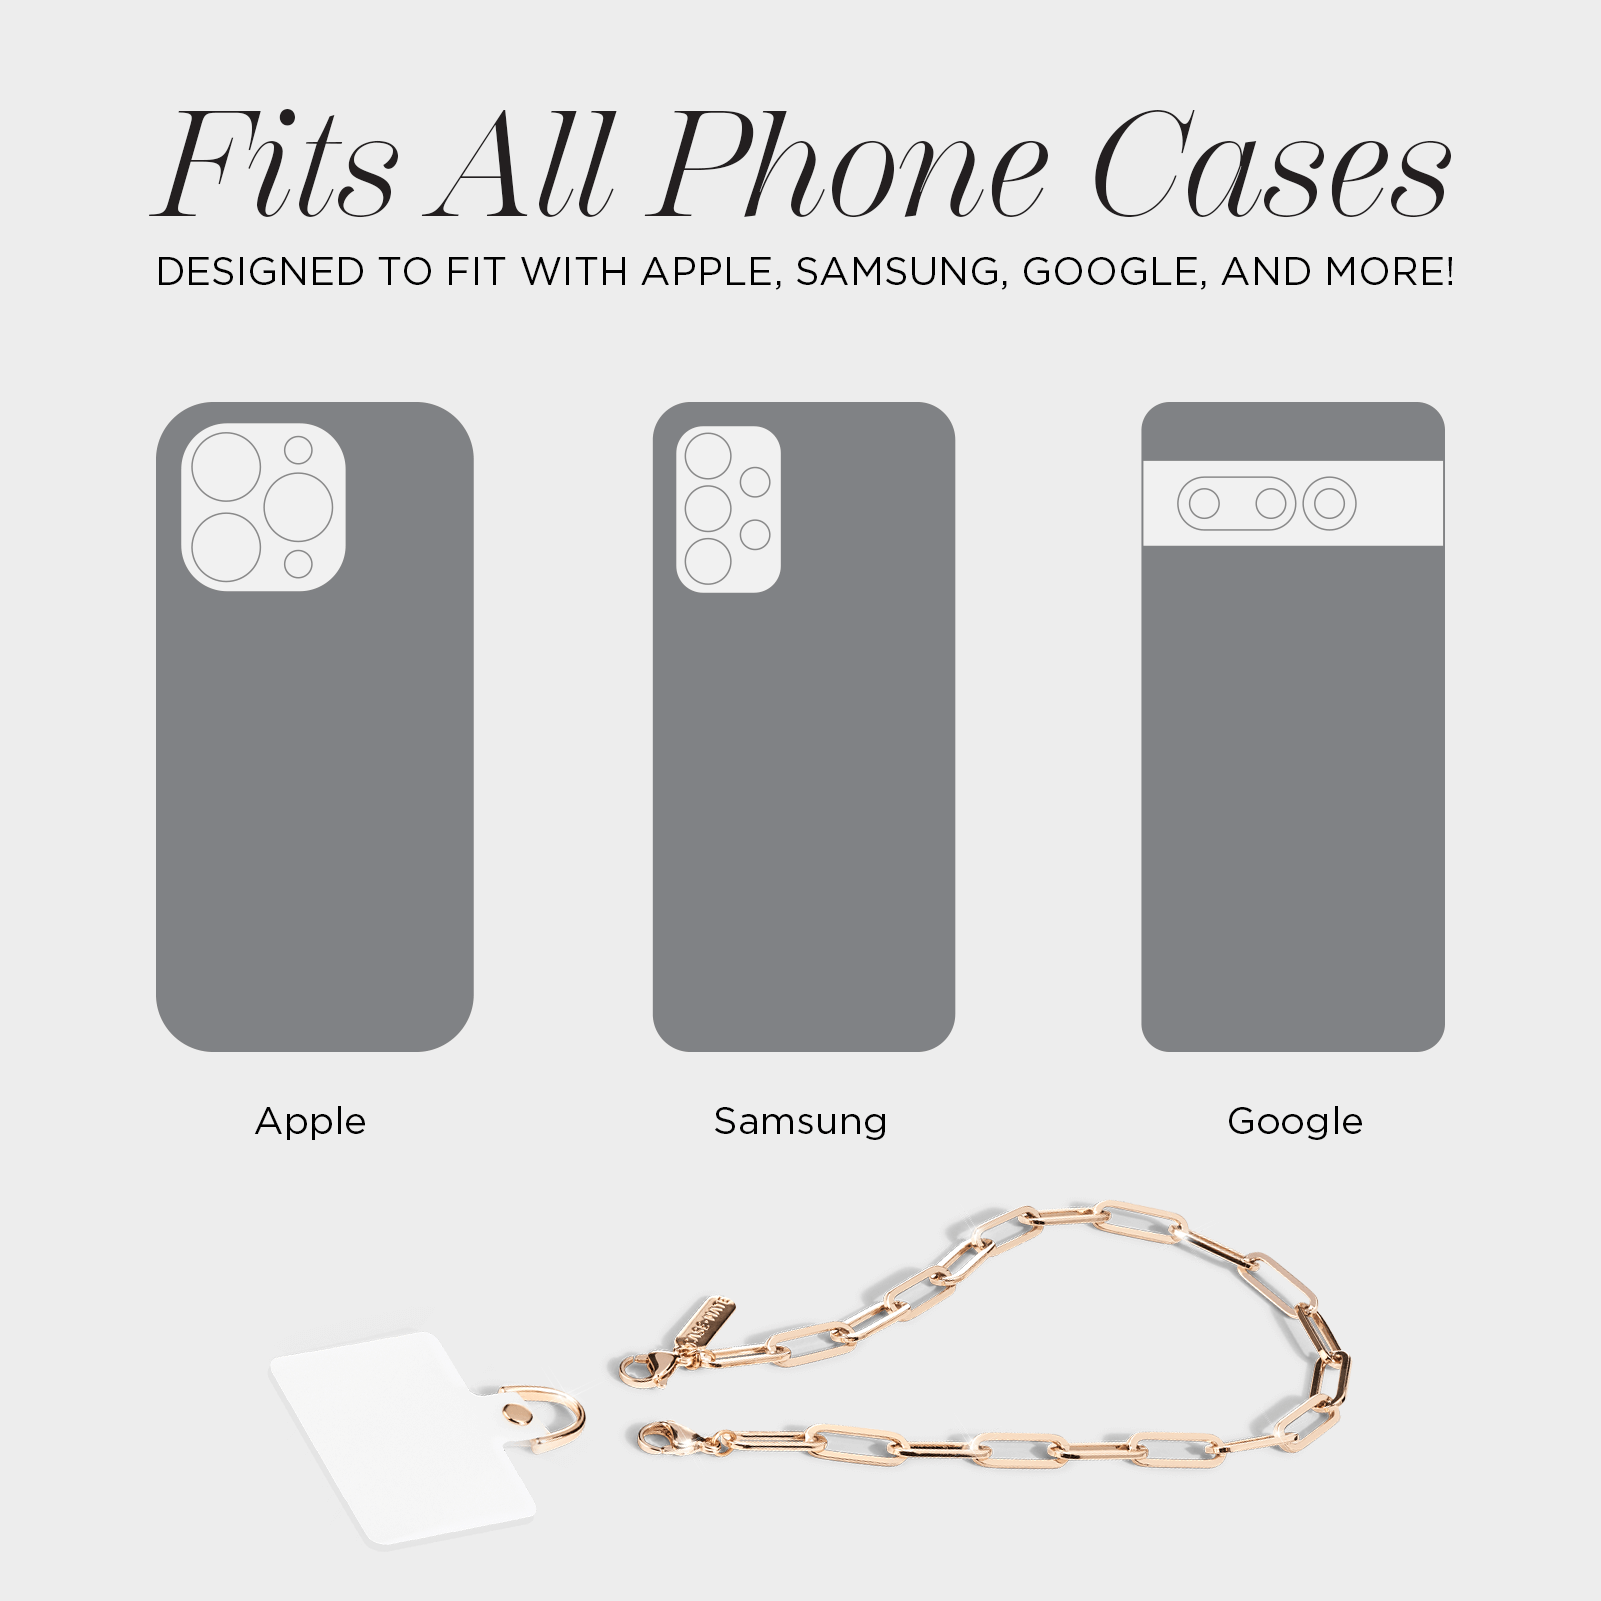 FITS ALL PHONE CASES. DESIGNED TO FIT WITH APPLE, SAMSUNG, GOOGLE, AND MORE!